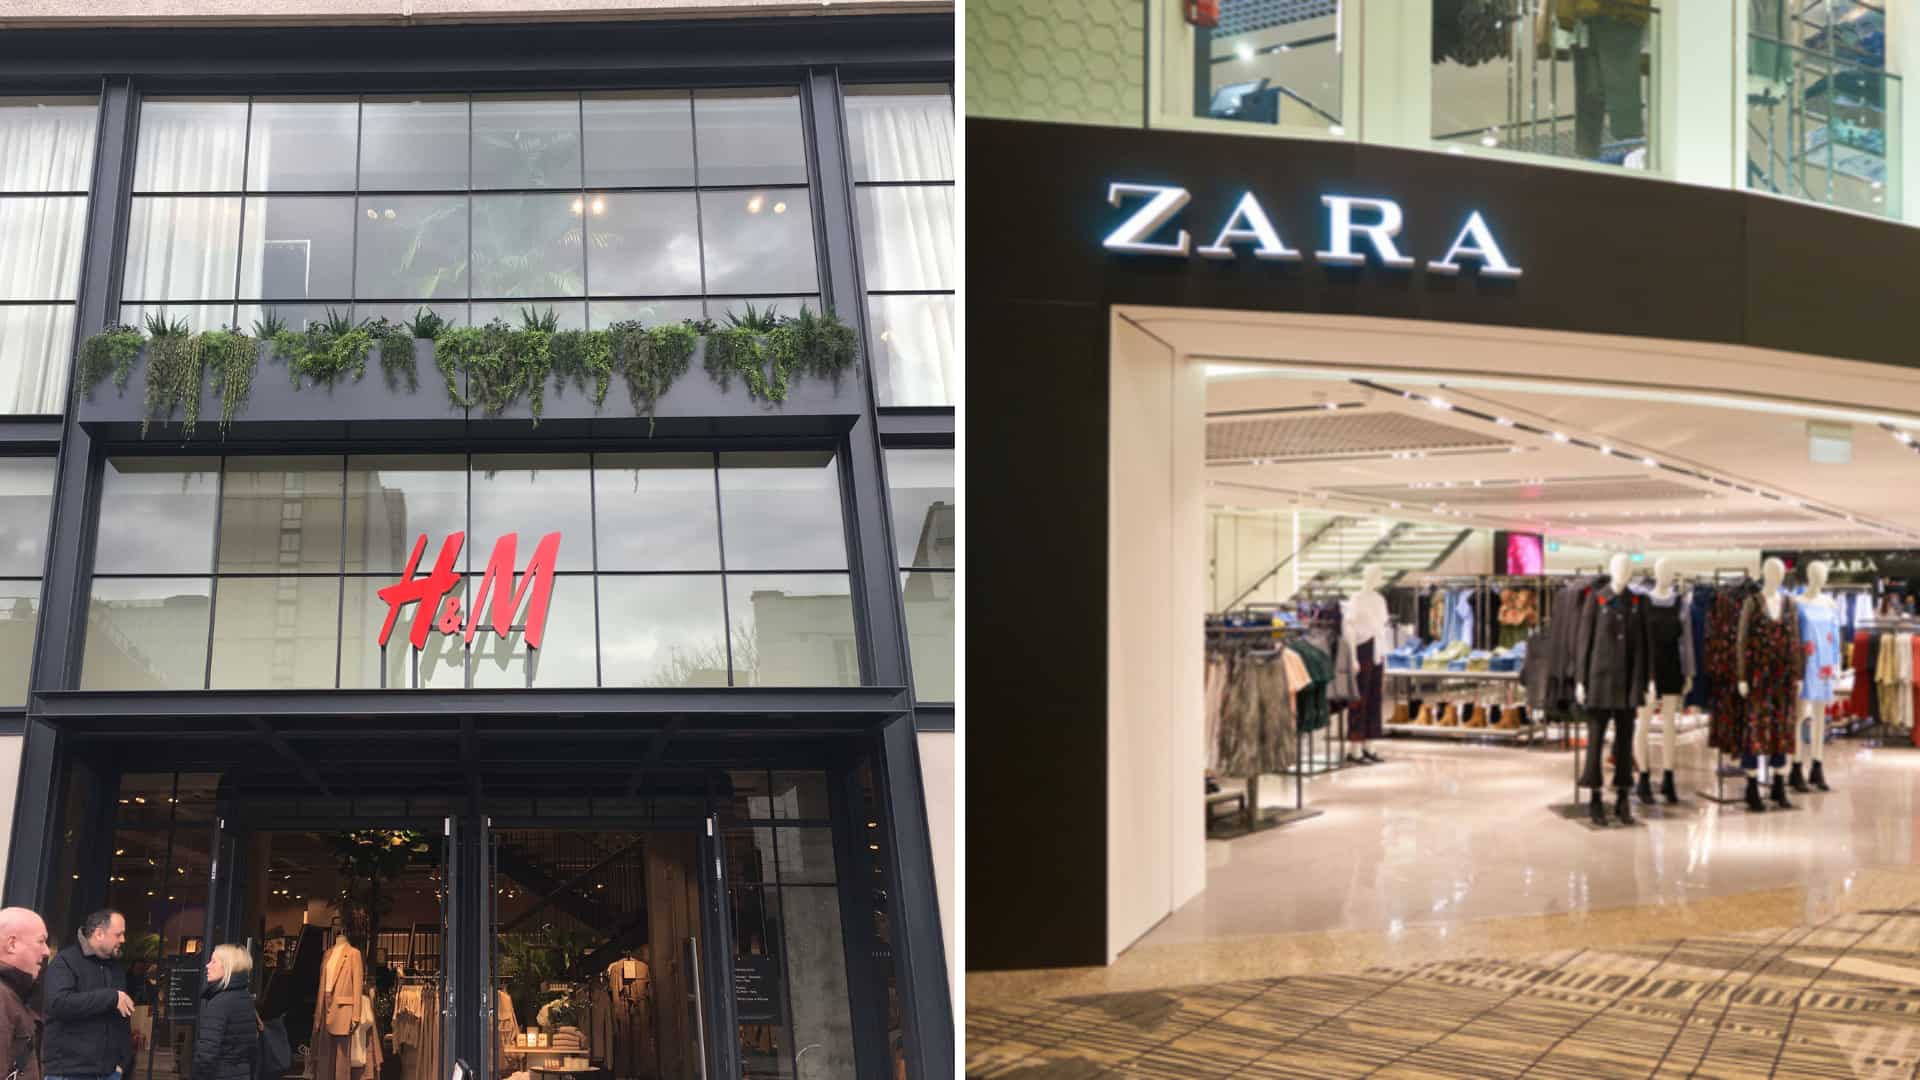 h&m,-zara-among-brands-accused-of-treating-bangladesh-suppliers-unfairly,-paying-less-than-their-cost